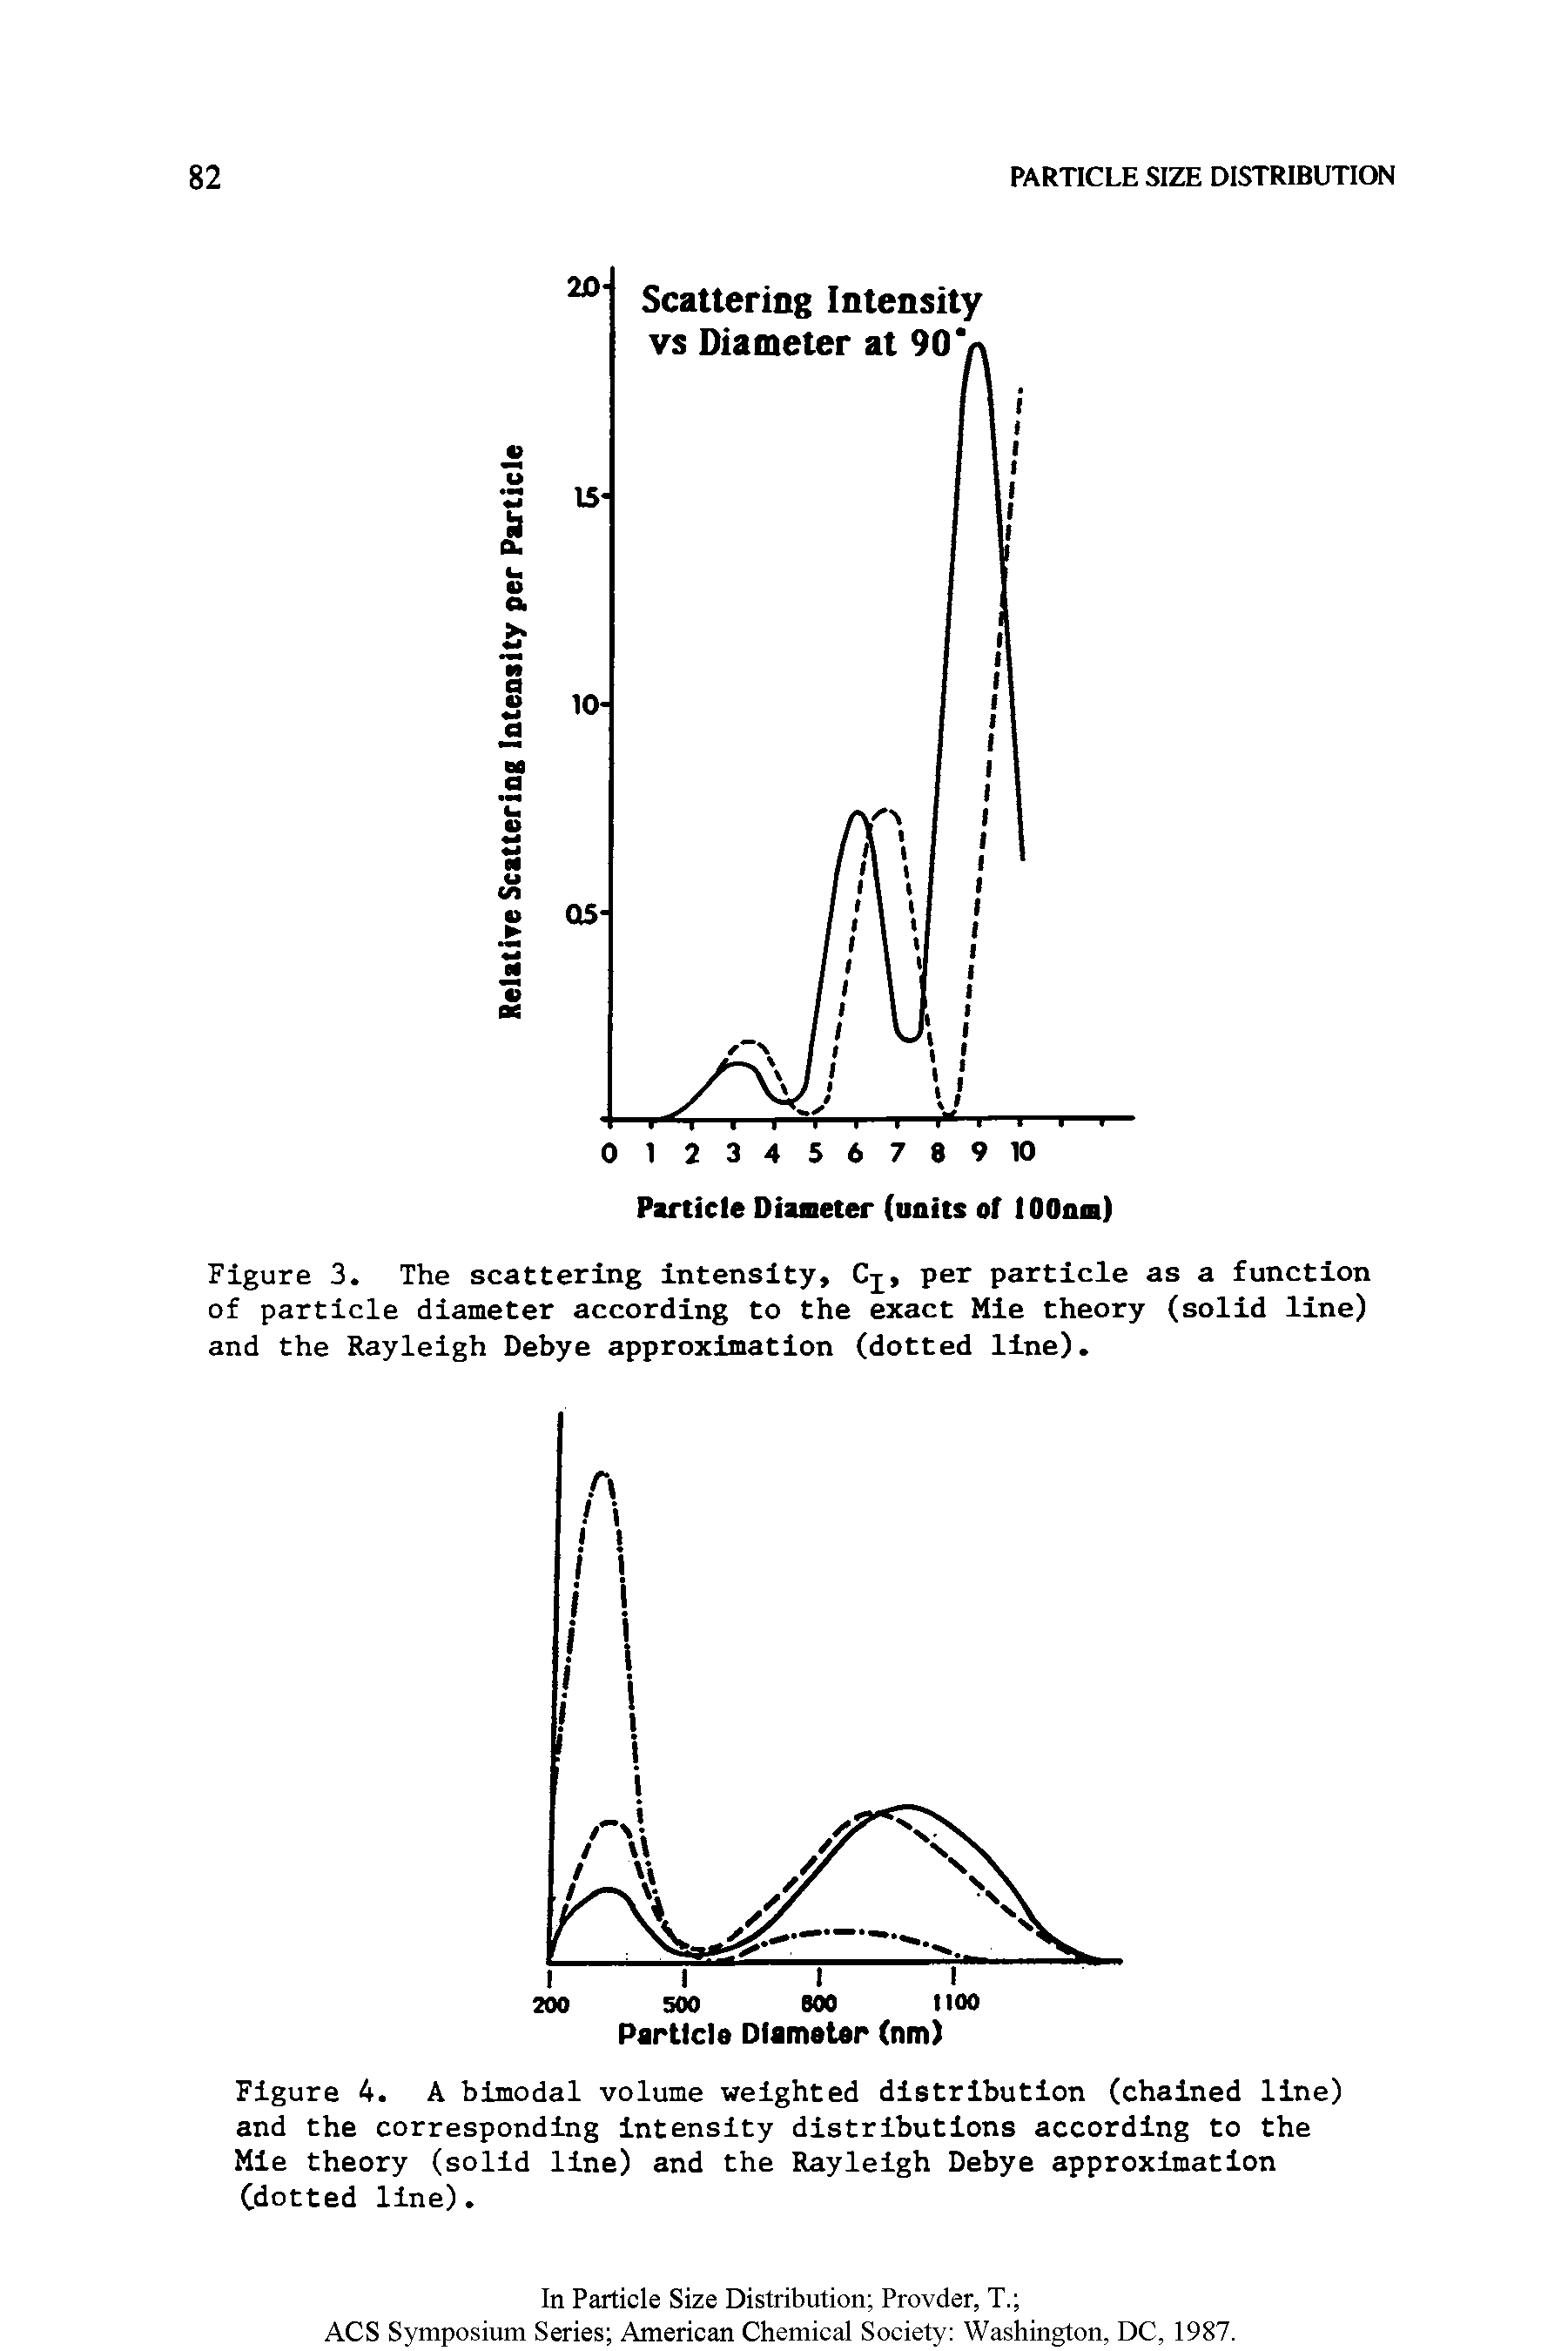 Figure 4. A bimodal volume weighted distribution (chained line) and the corresponding intensity distributions according to the Mie theory (solid line) and the Rayleigh Debye approximation (dotted line).